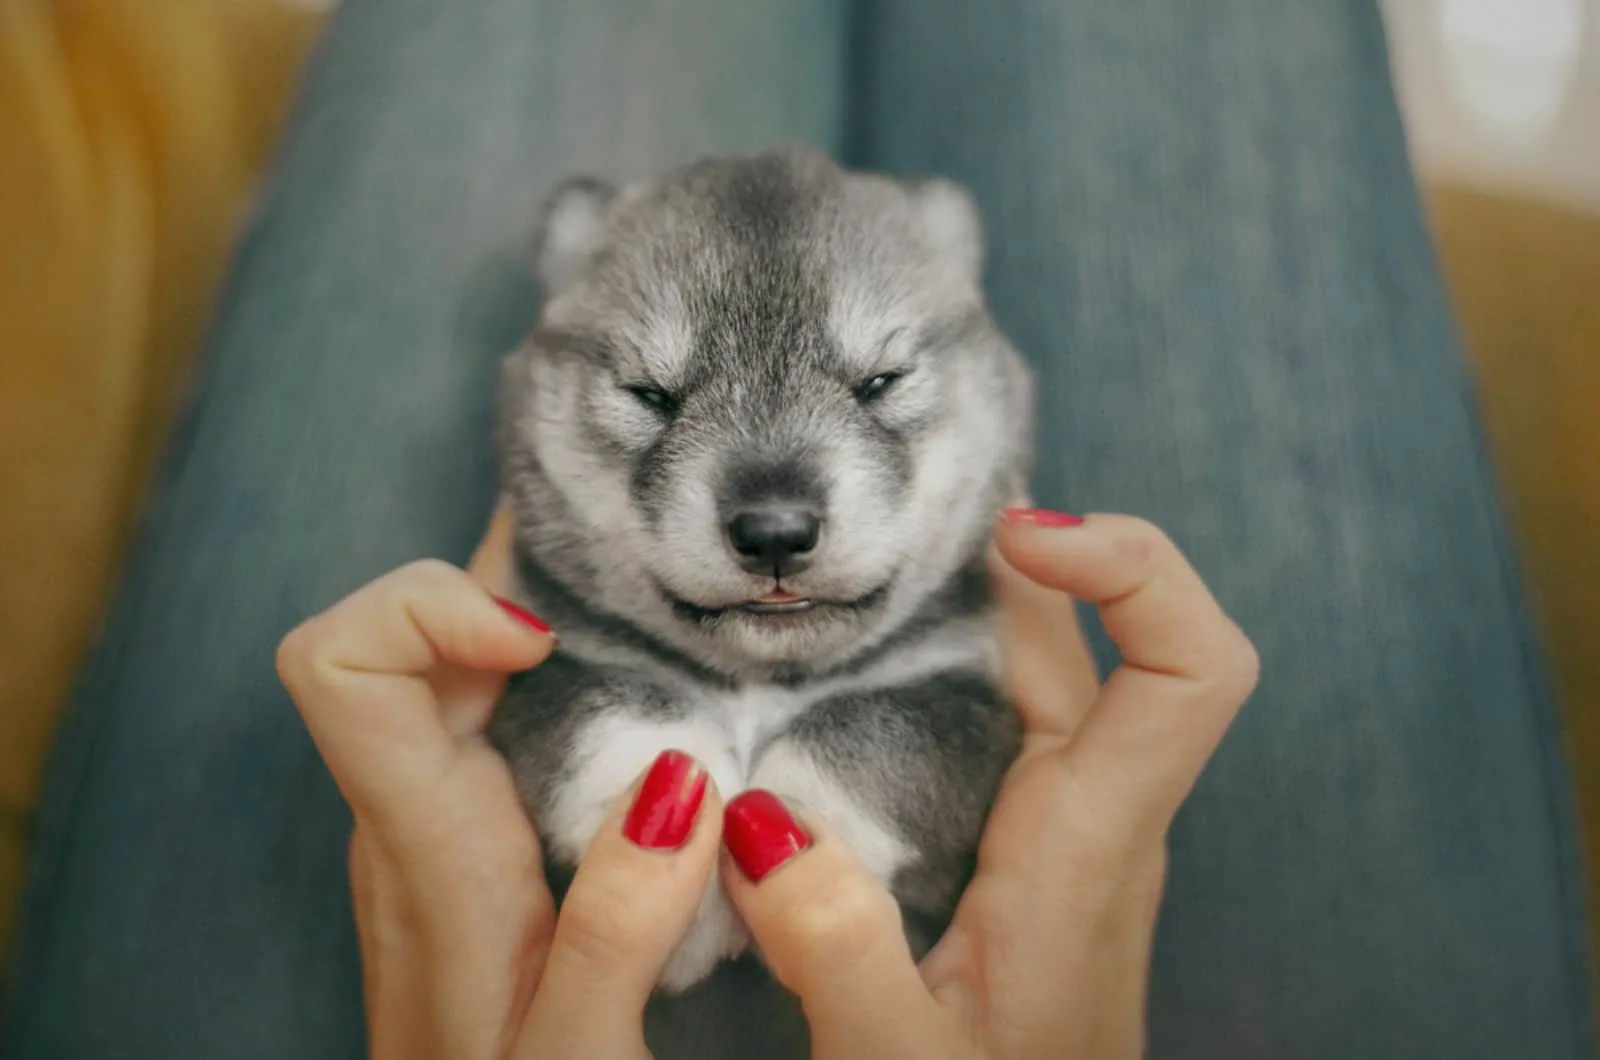 Siberian husky agouti puppy in woman's hands